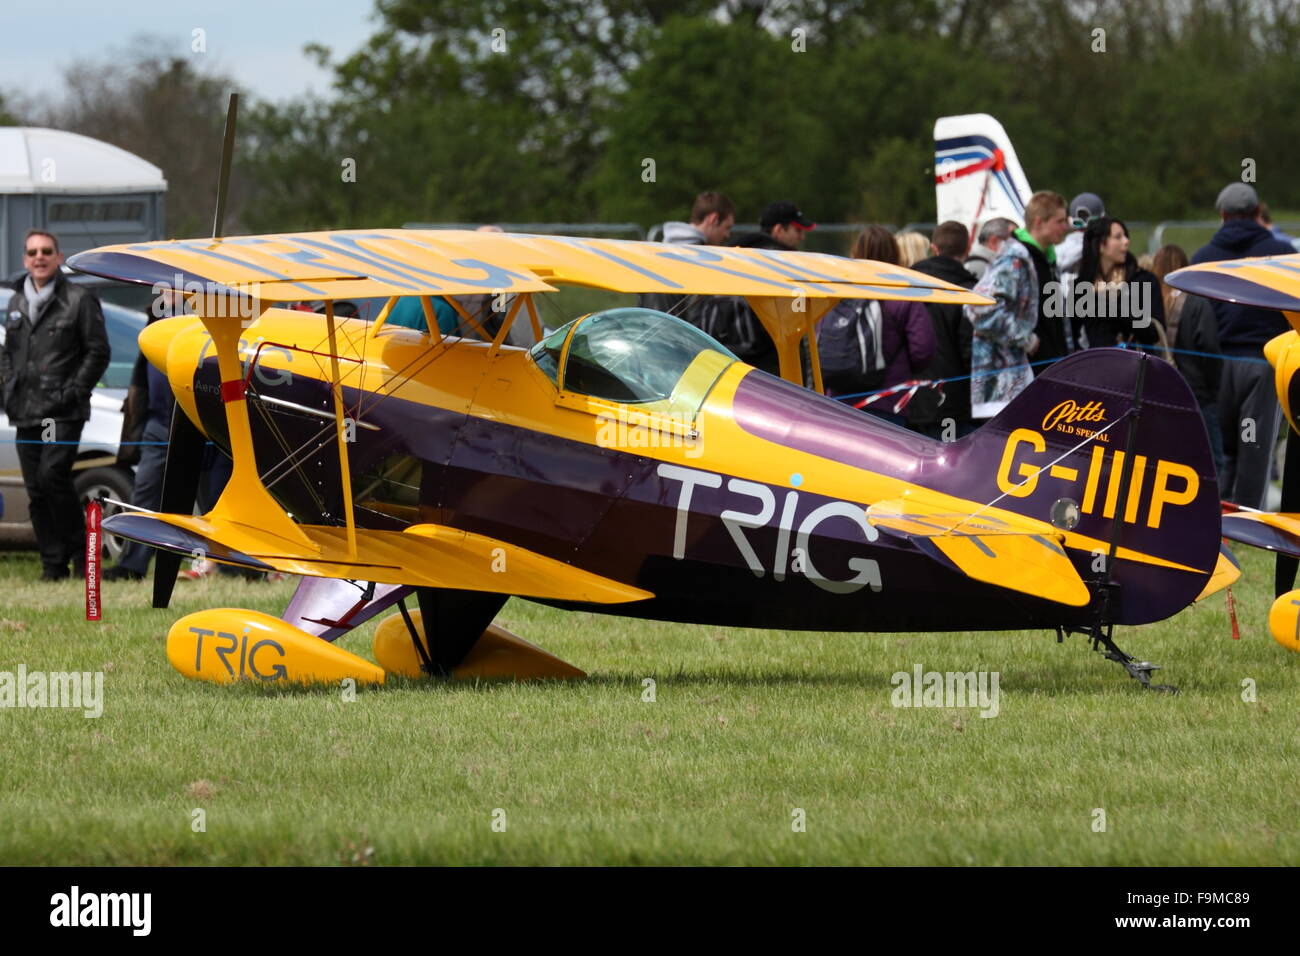 TRIG Pitts S-1D Special on Display at the Abingdon Air & Country Show Stock Photo